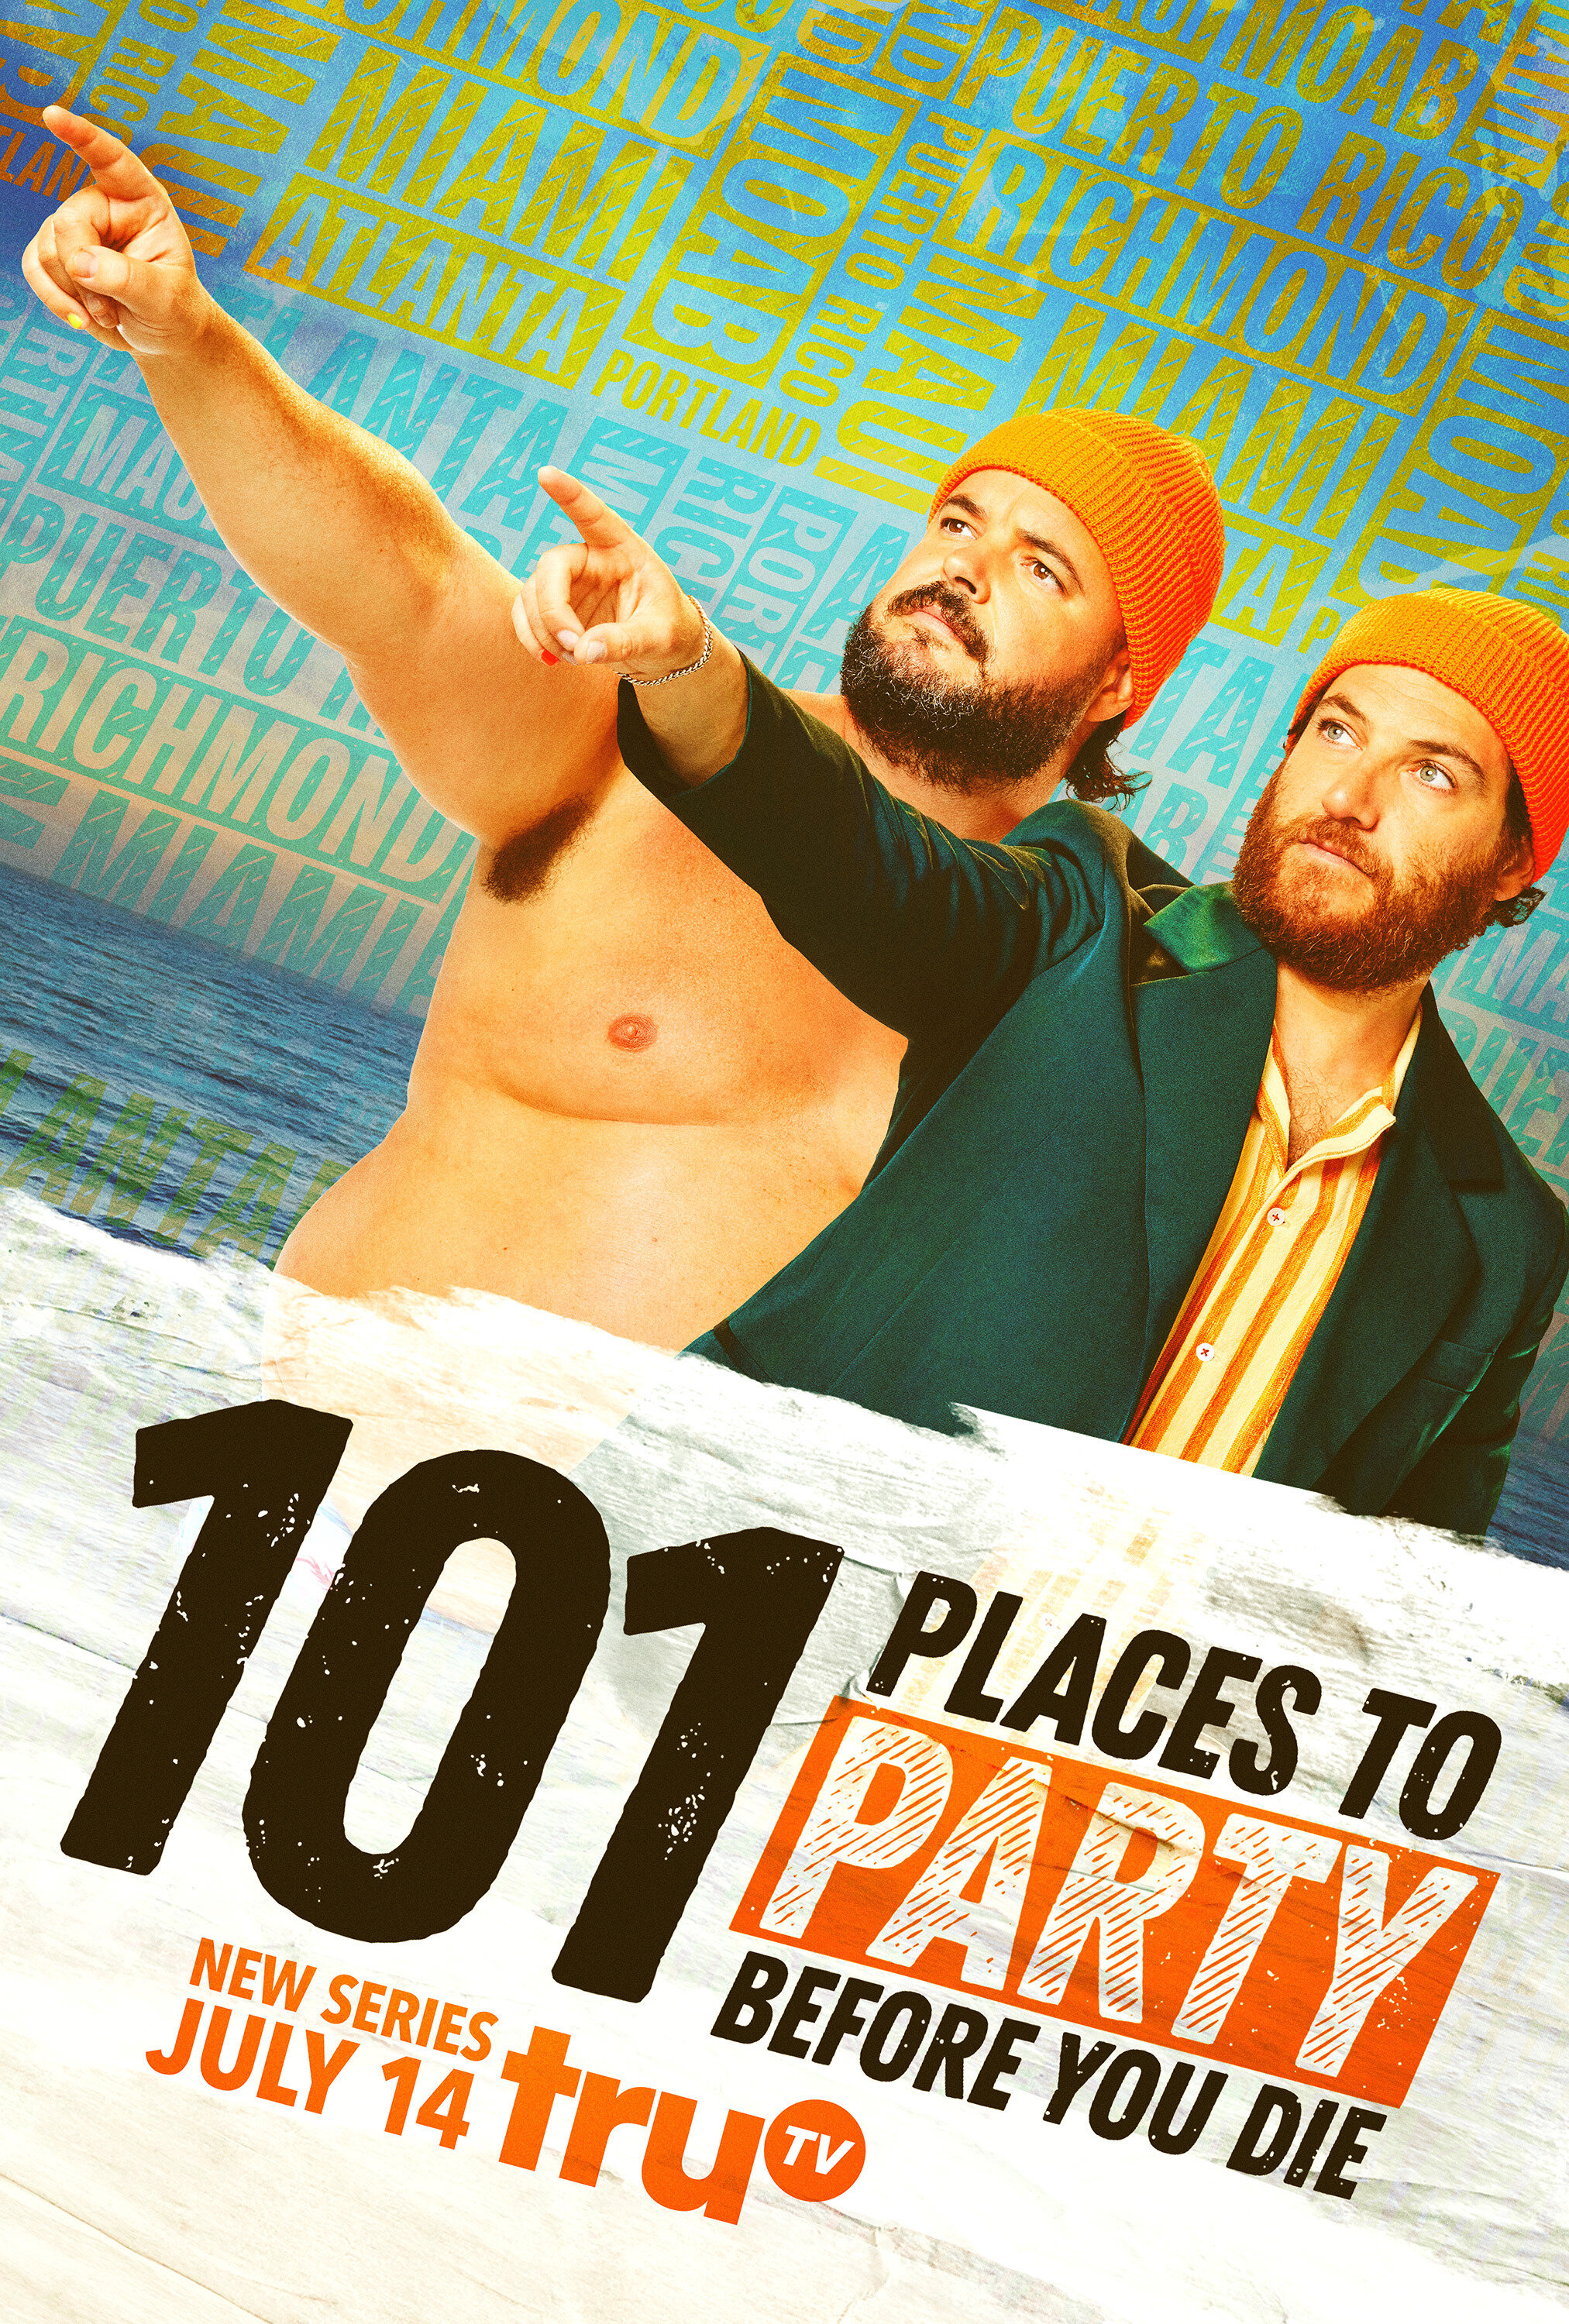 101 Places to Party Before You Die ne zaman